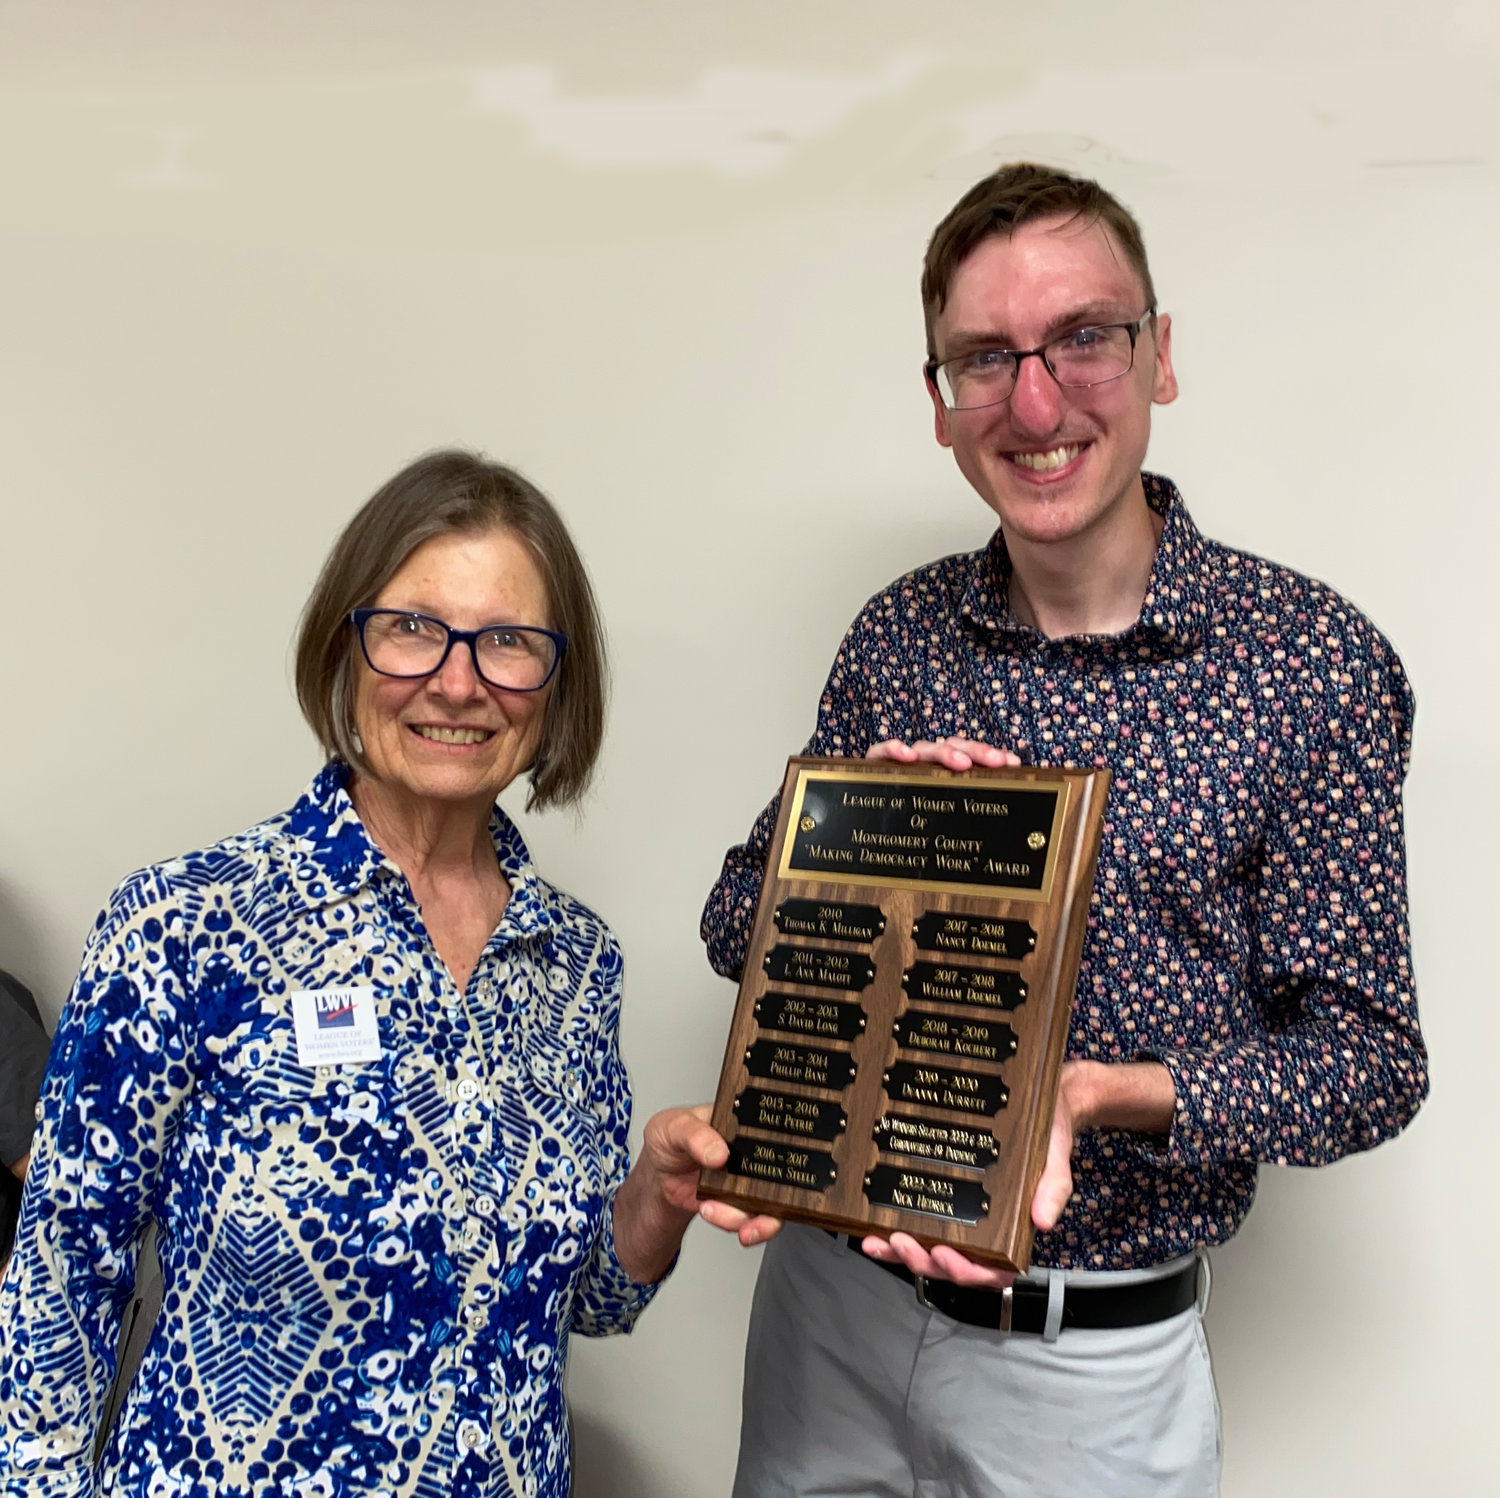 Nick Hedrick receives the “Making Democracy Work” award from the League of Women Voters’ co-president Helen Hudson.